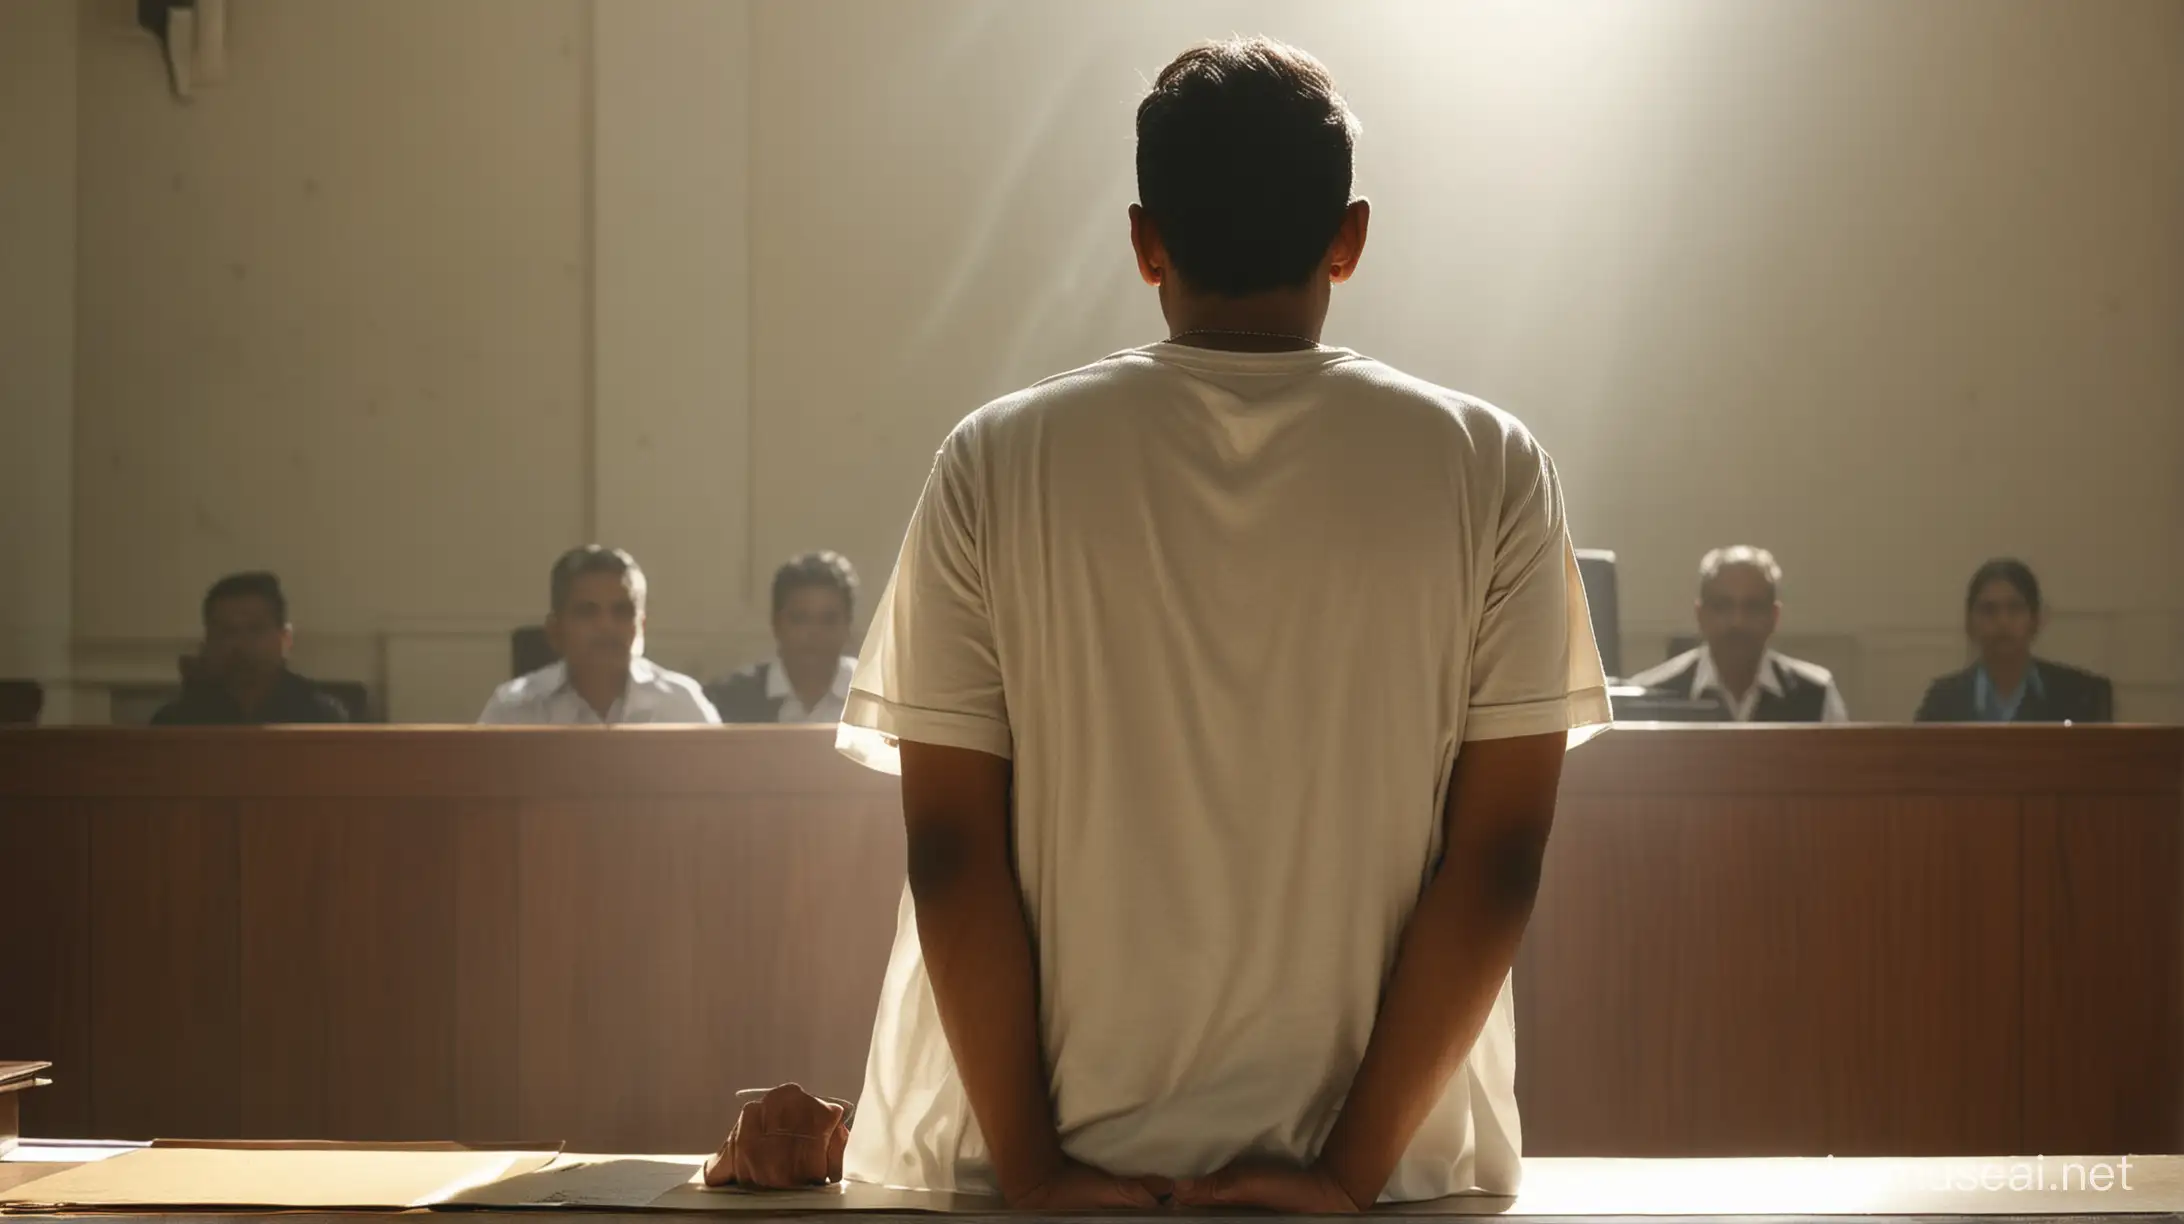 Indian man wearing t shirt standing in witness box in front of one judge, shot from behind, detailed, backlight